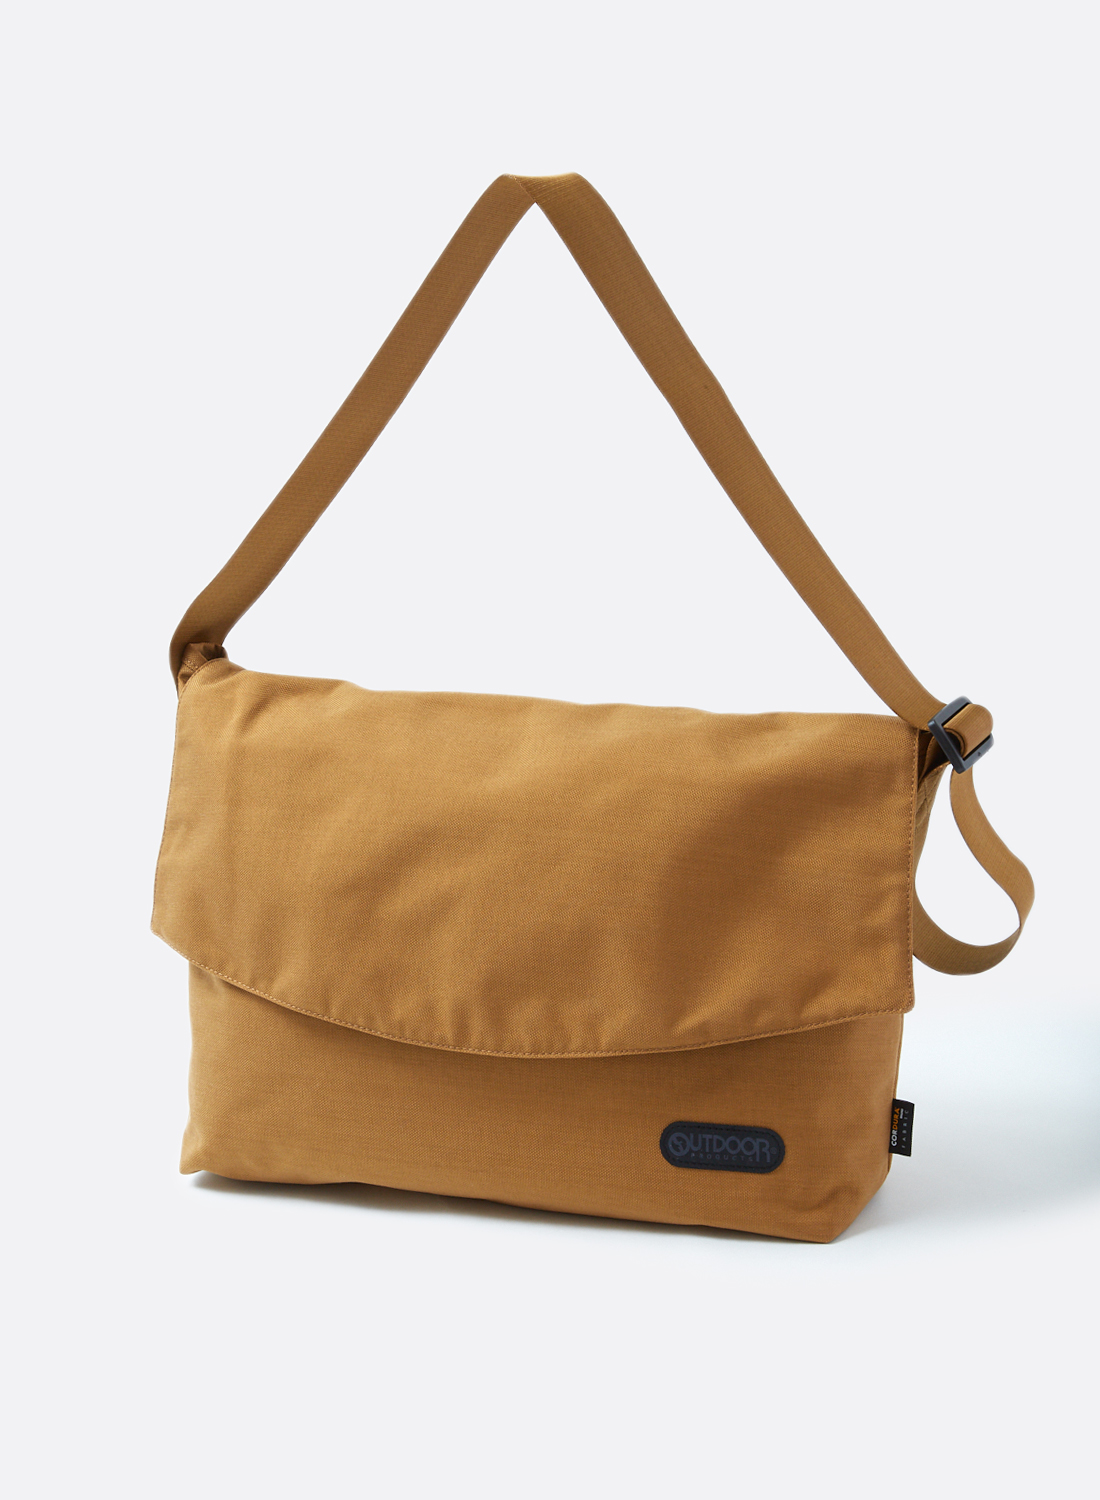 BAL/OUTDOOR PRODUCTS® MESSENGER BAG-bal flagship store Exclusive Color-